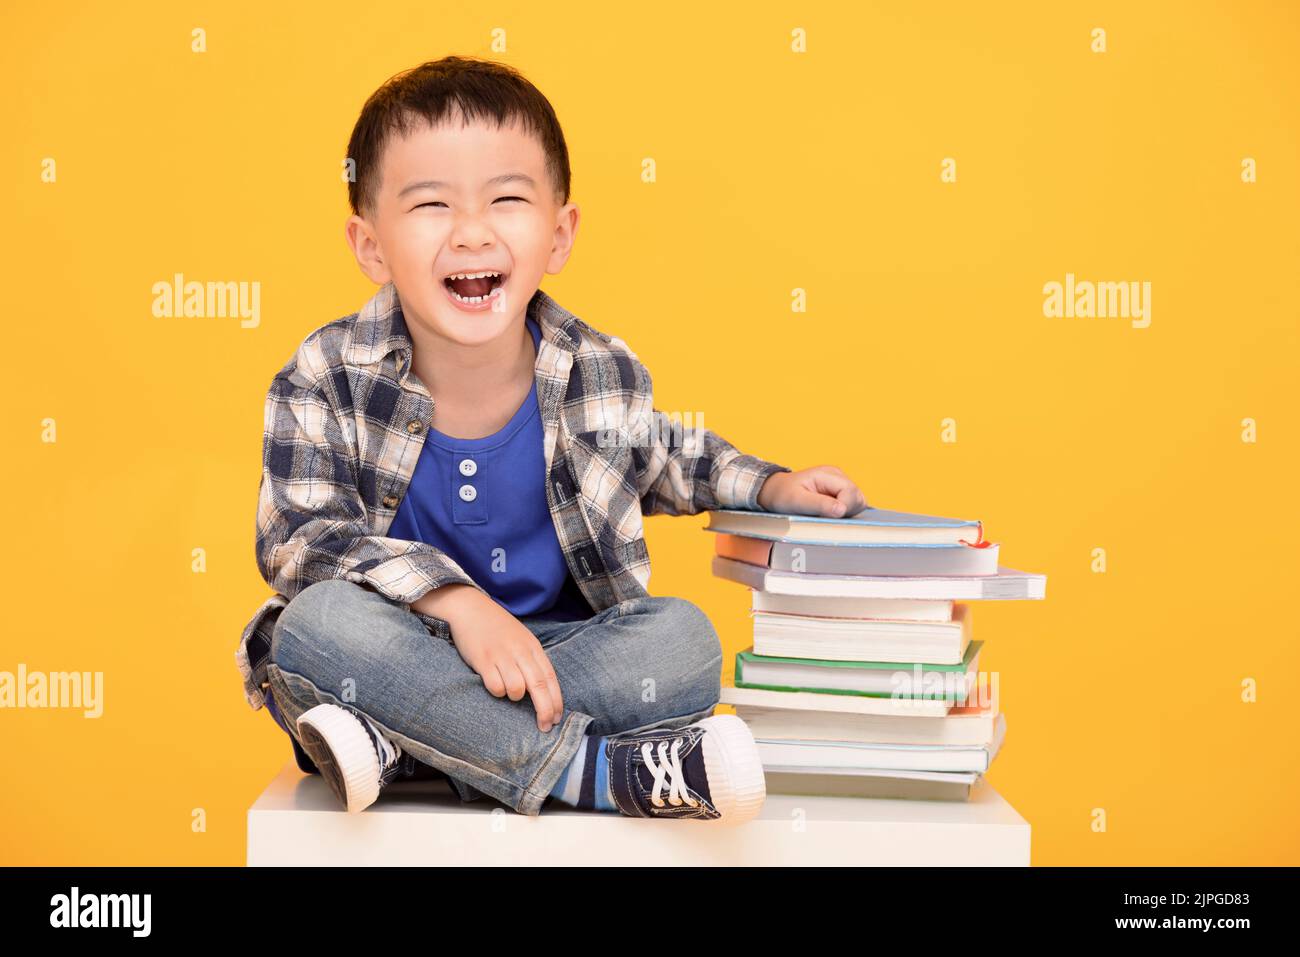 Happy kid sitting with books isolated on yellow background Stock Photo